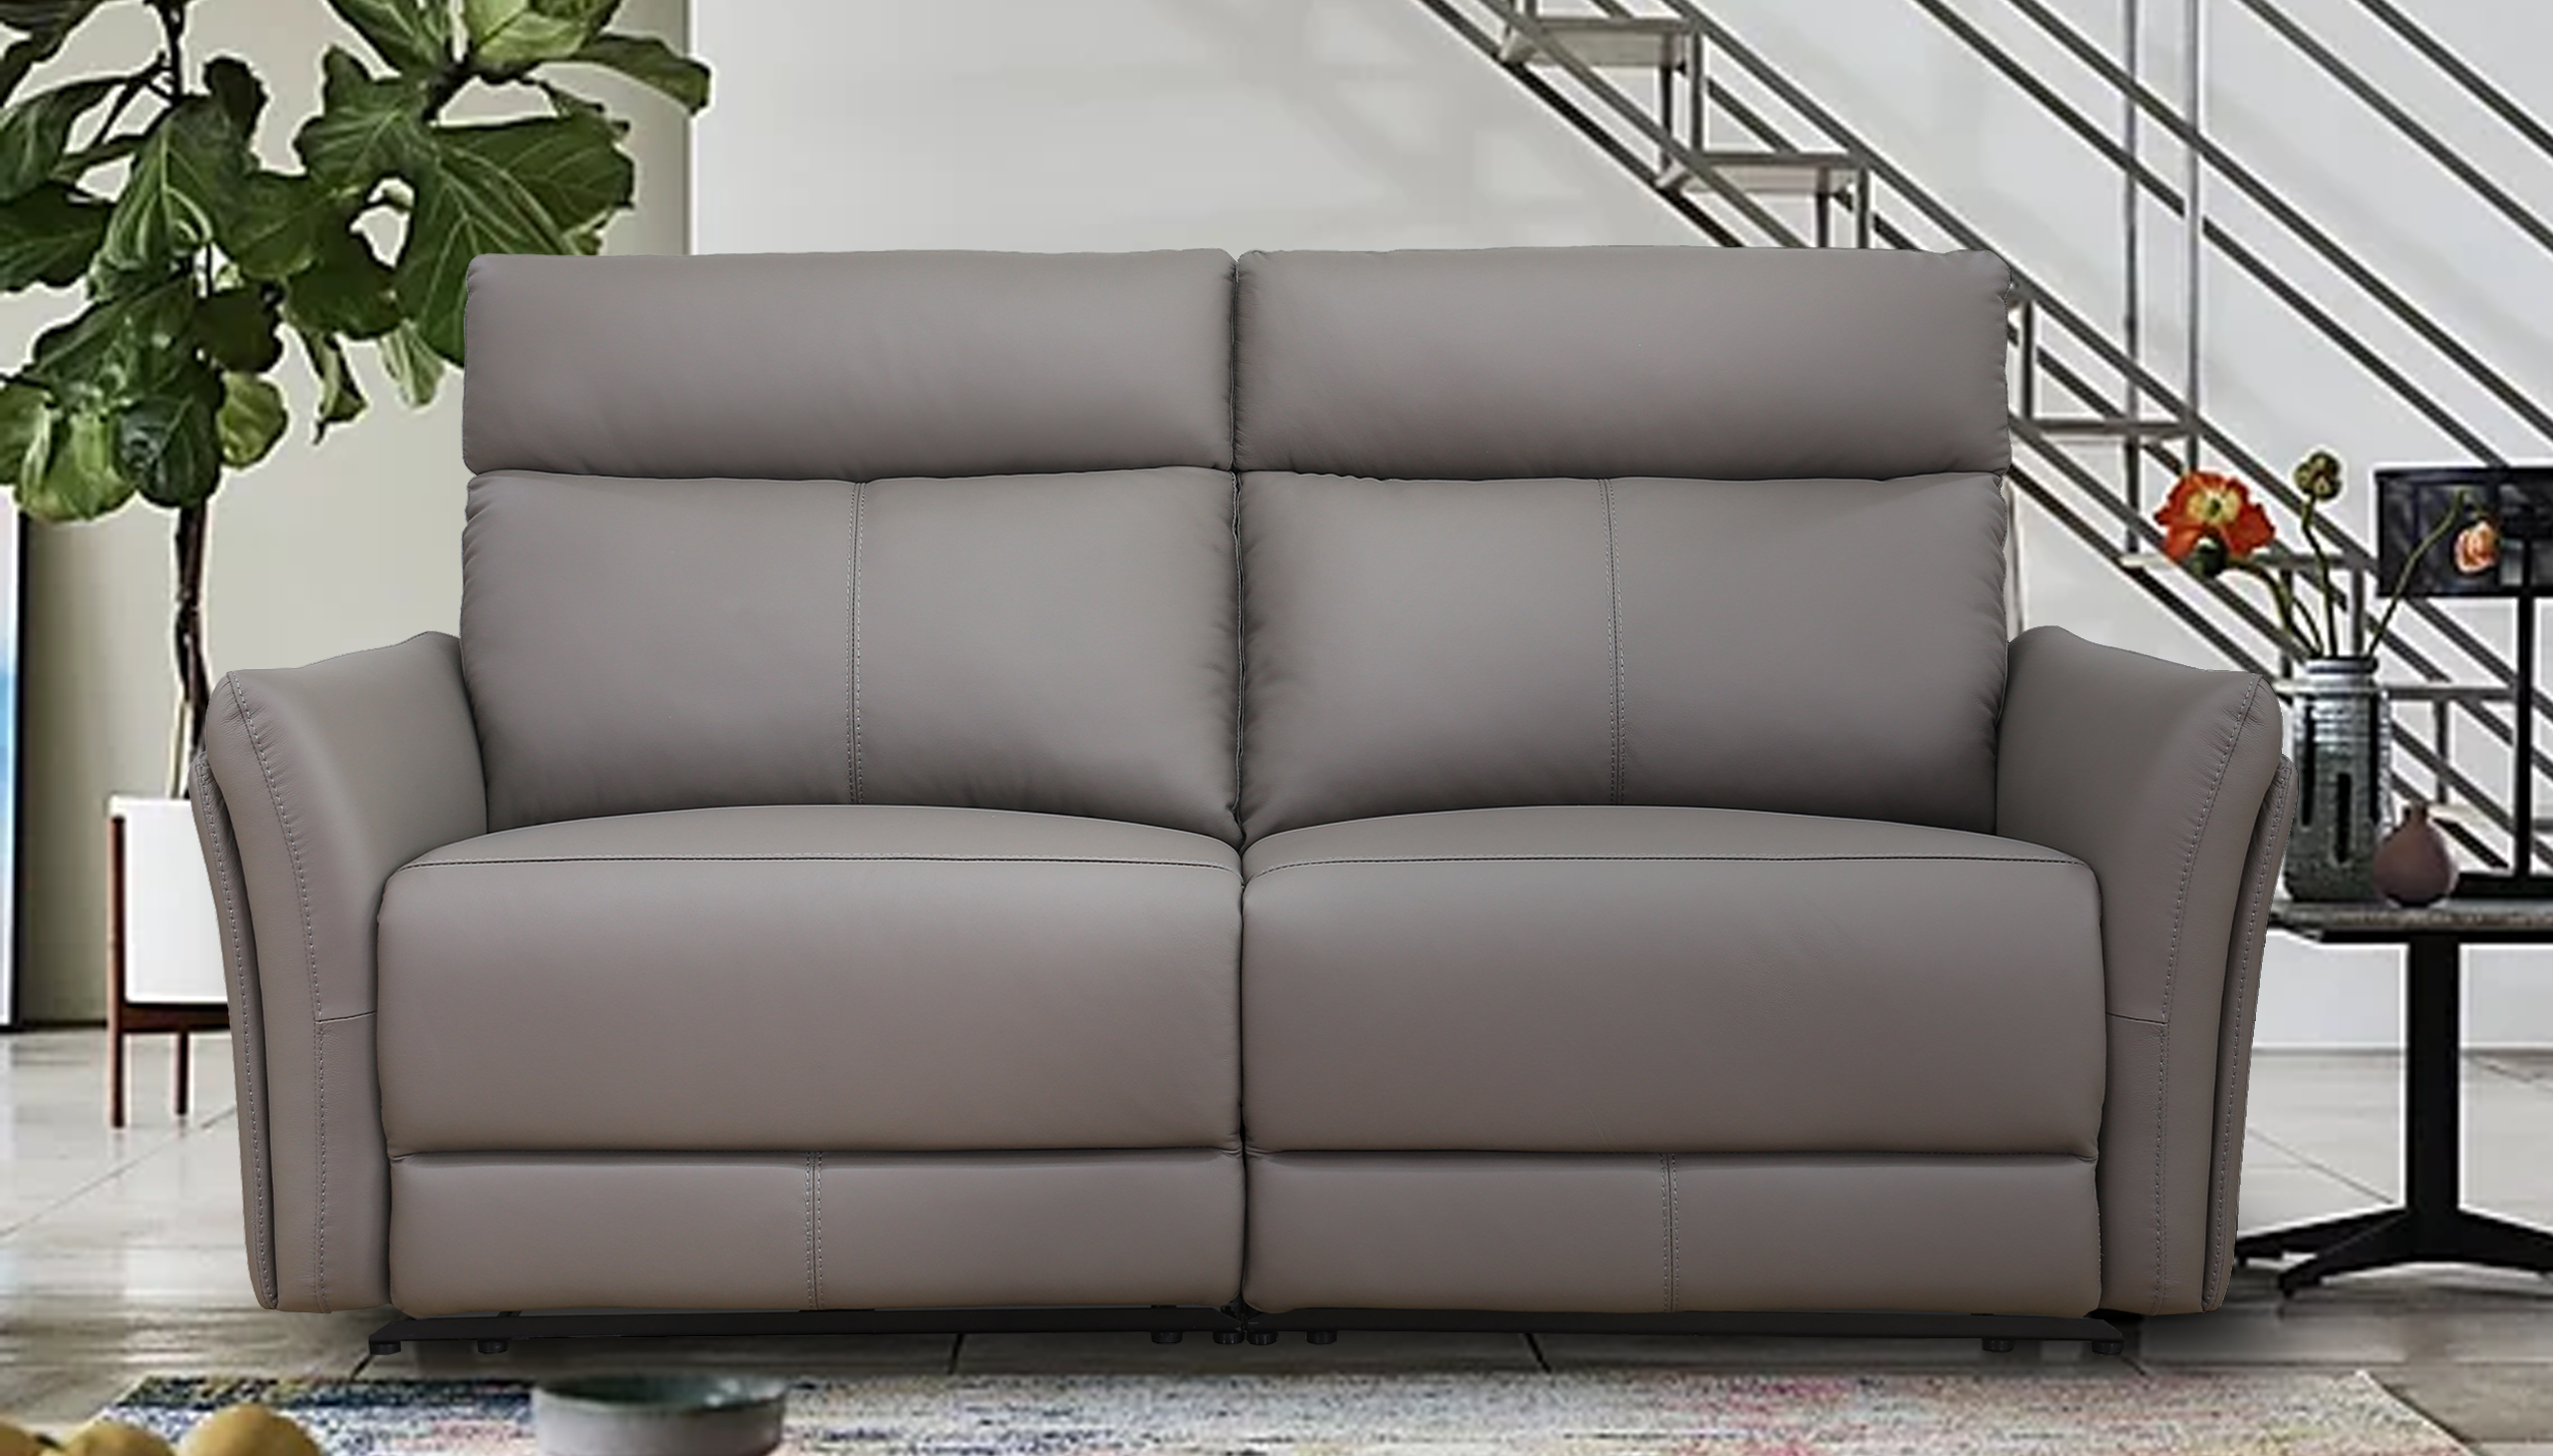 Vogue 2 Seater Leather Power Recliner Sofa - In Stock